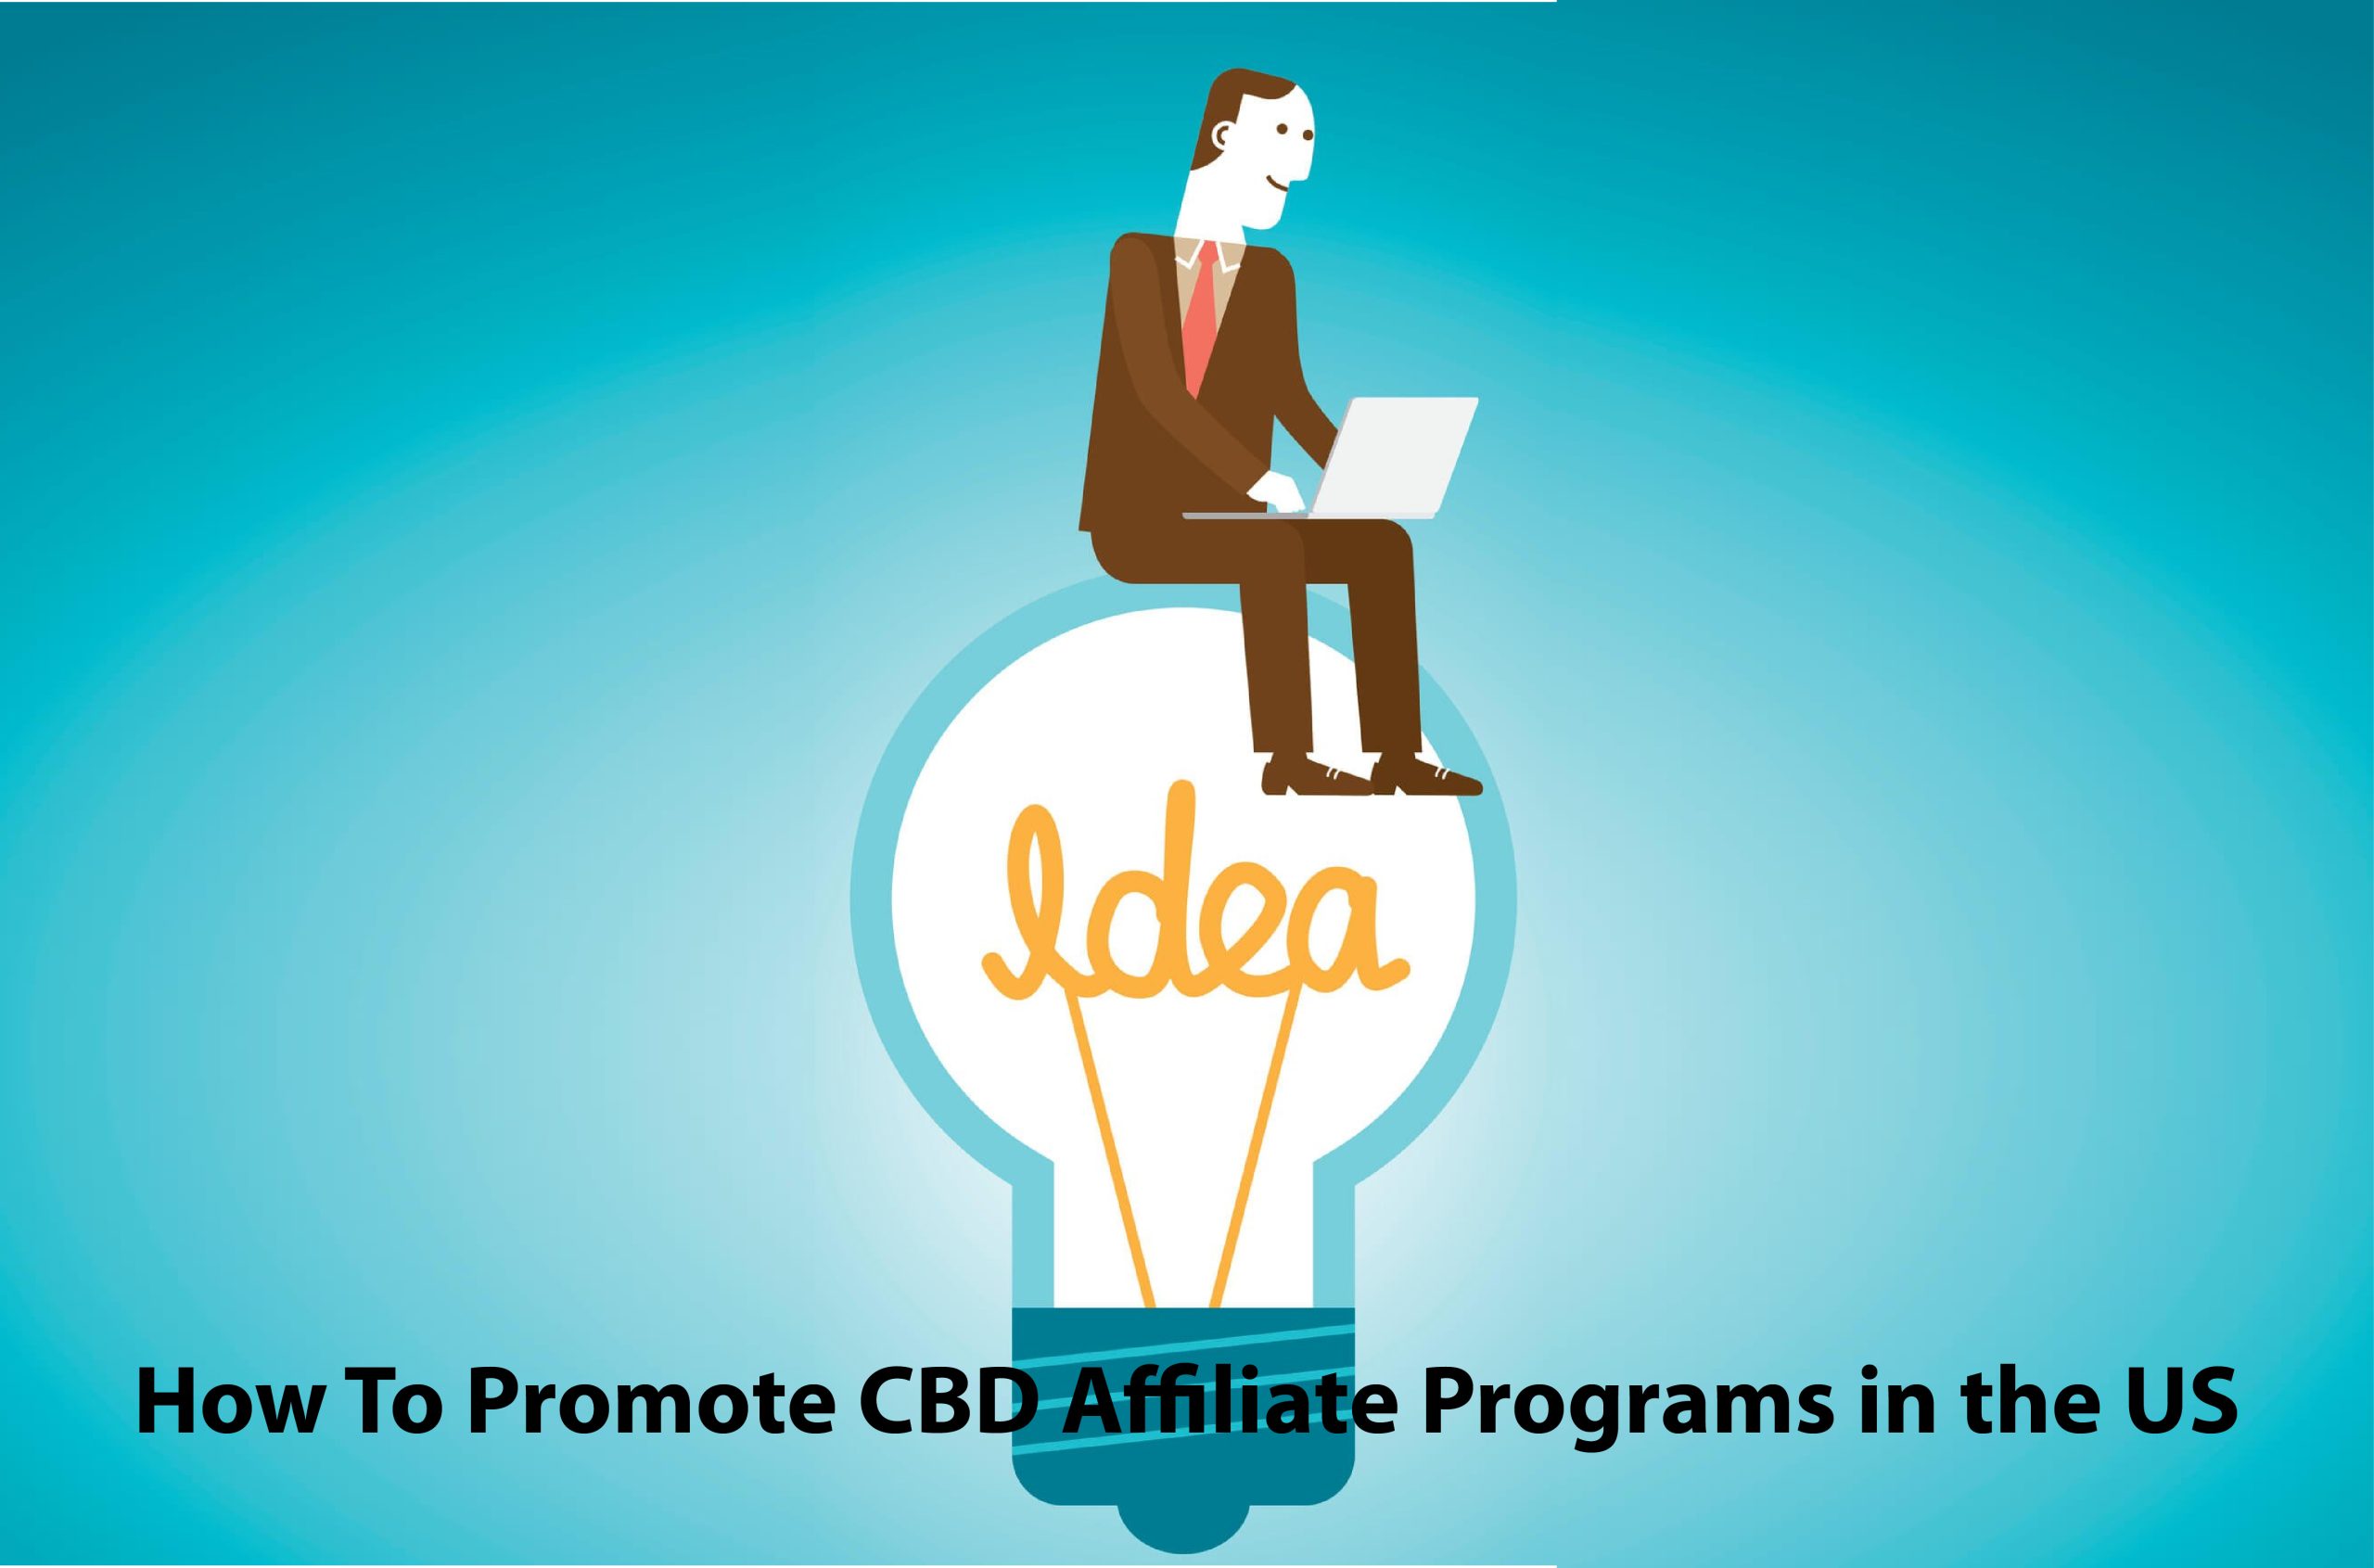 How To Promote CBD Affiliate Programs in the US